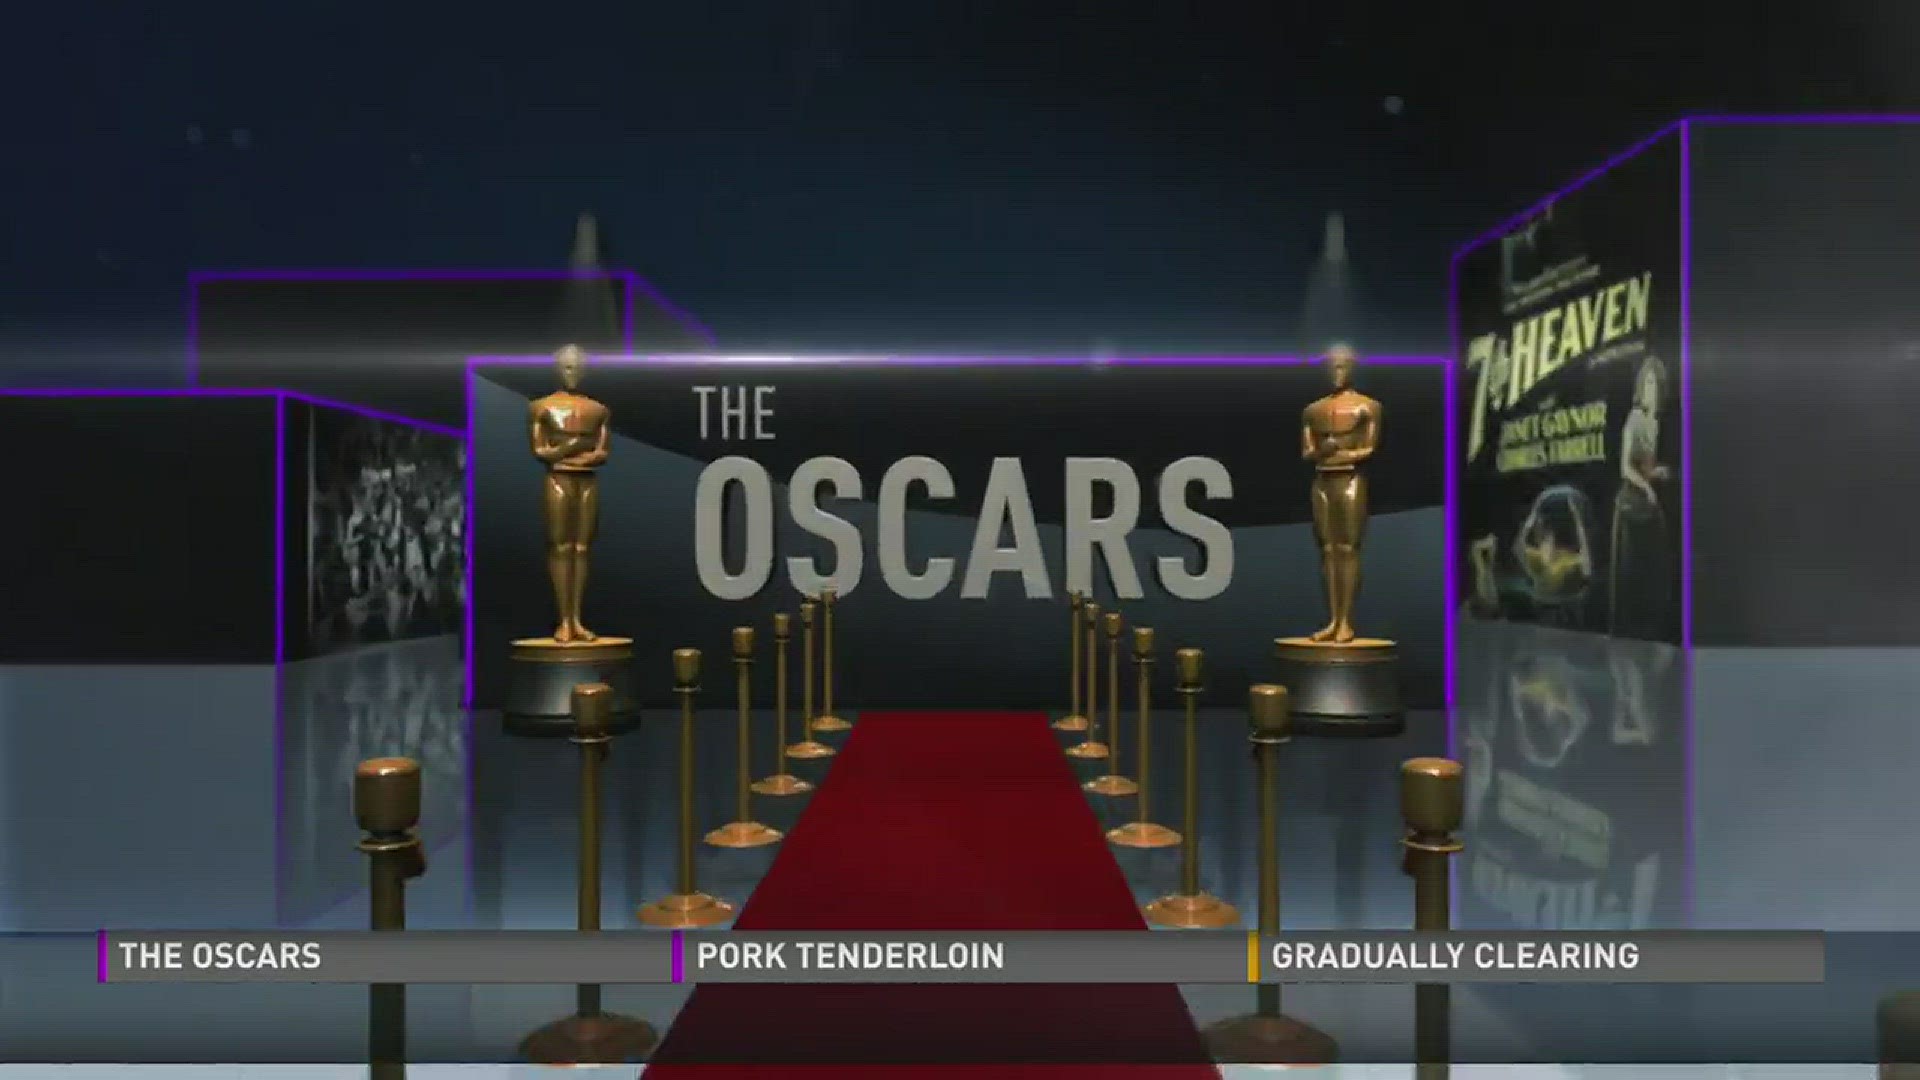 Movie guy Josh West talks about his favorite moments from The Oscars.